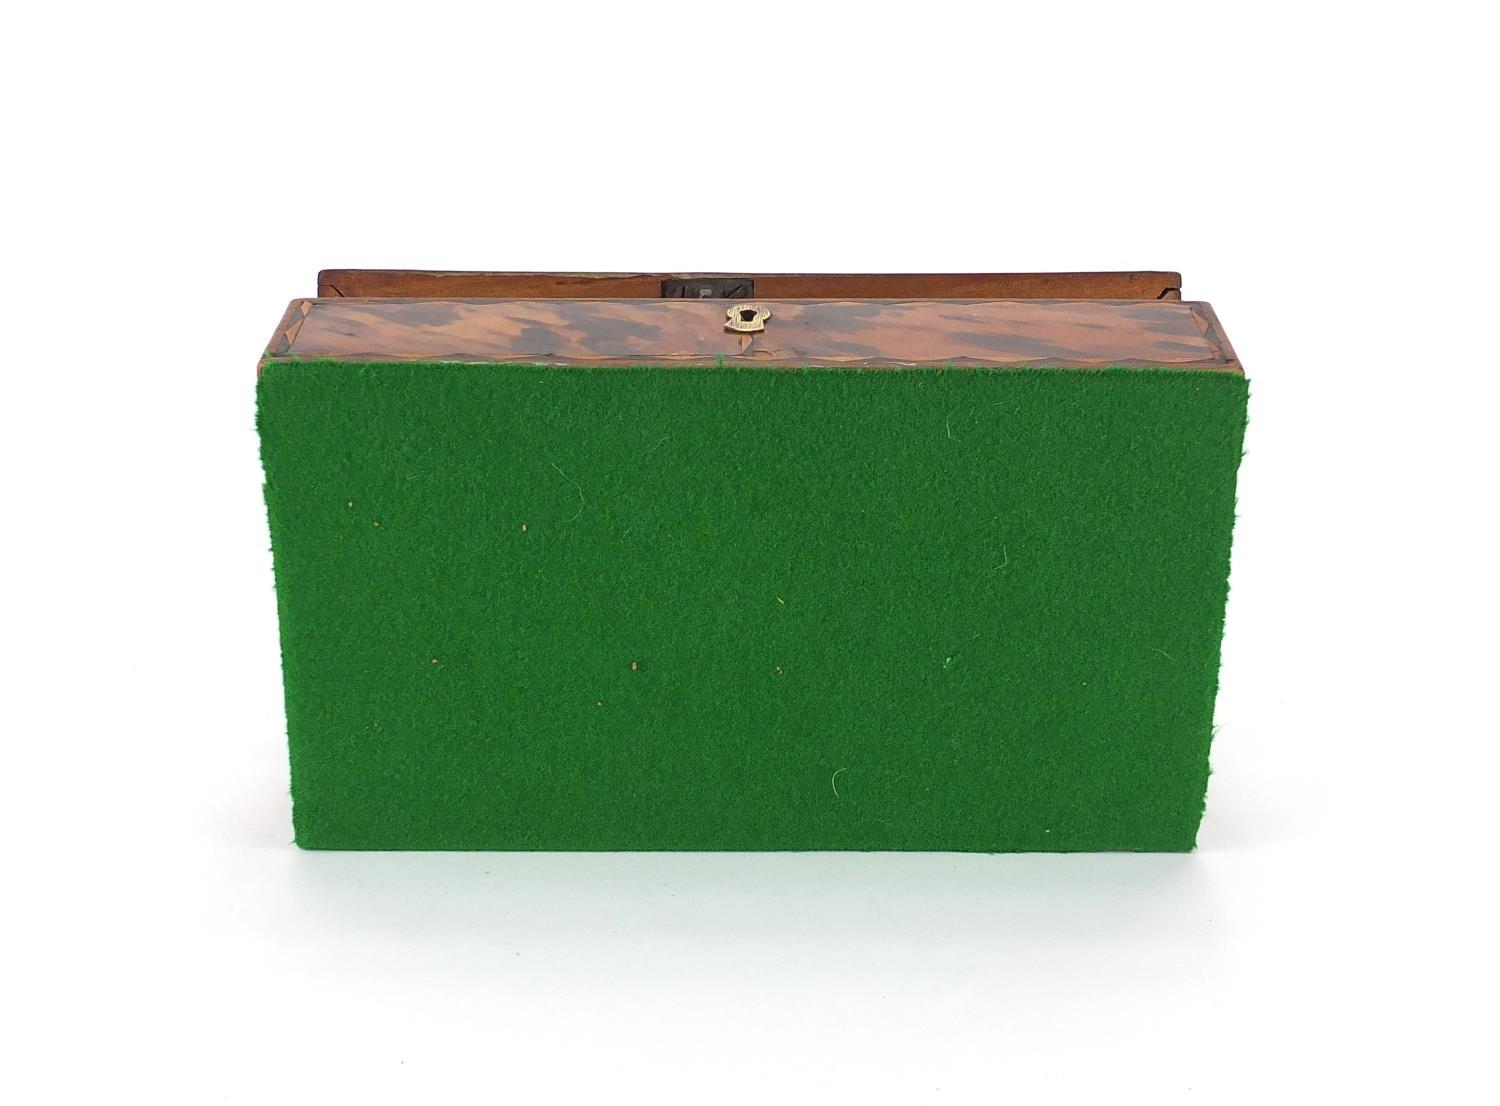 Rectangular inlaid tortoiseshell box with hinged lid, 7.5cm H x 23cm W x 13cm D : For further - Image 4 of 4